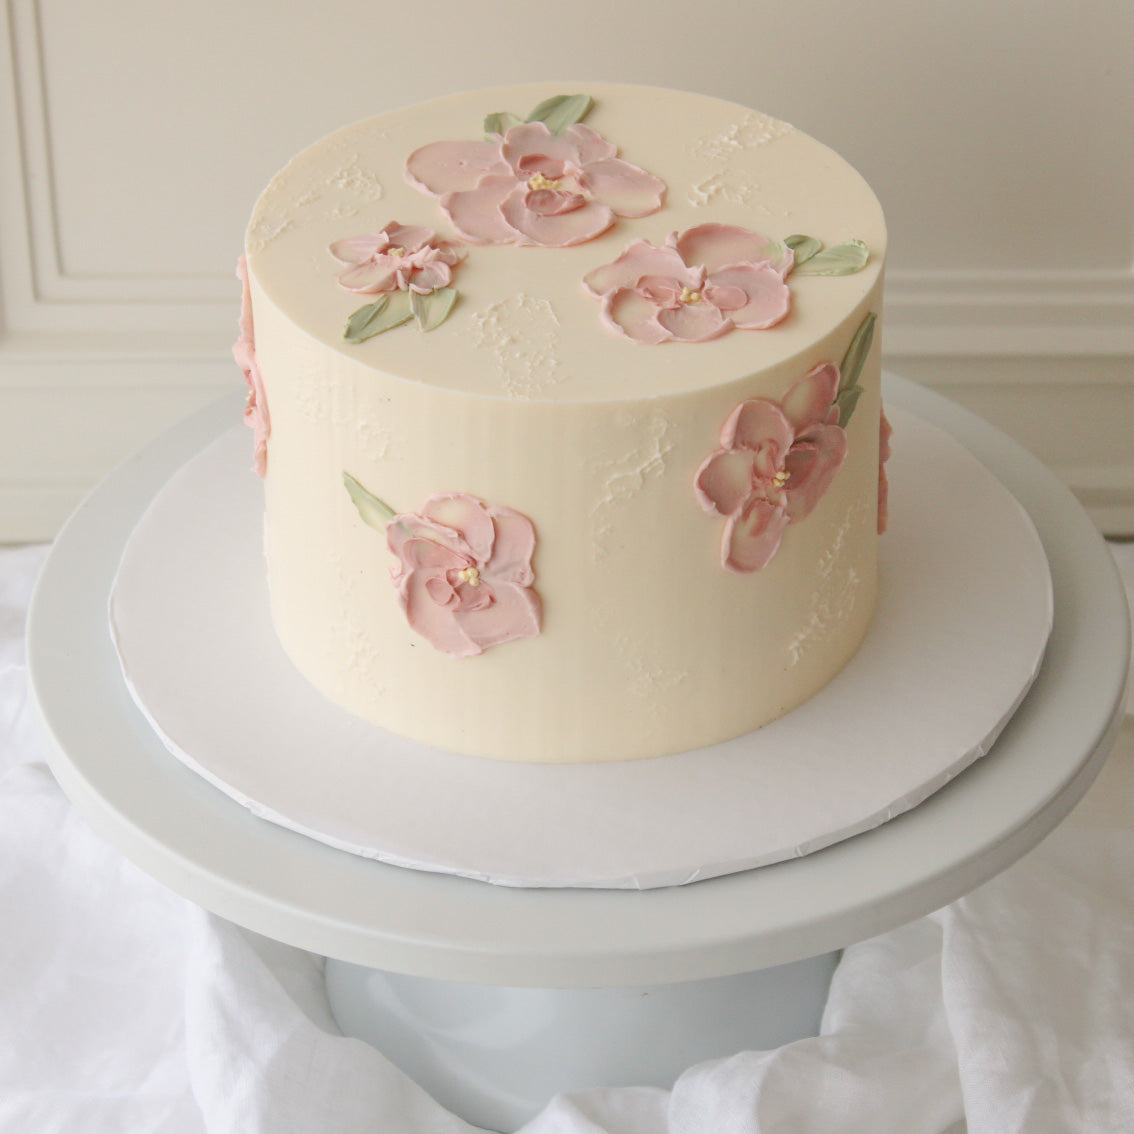 Wintery Square Cake with Buttercream Flowers & Striped Texture